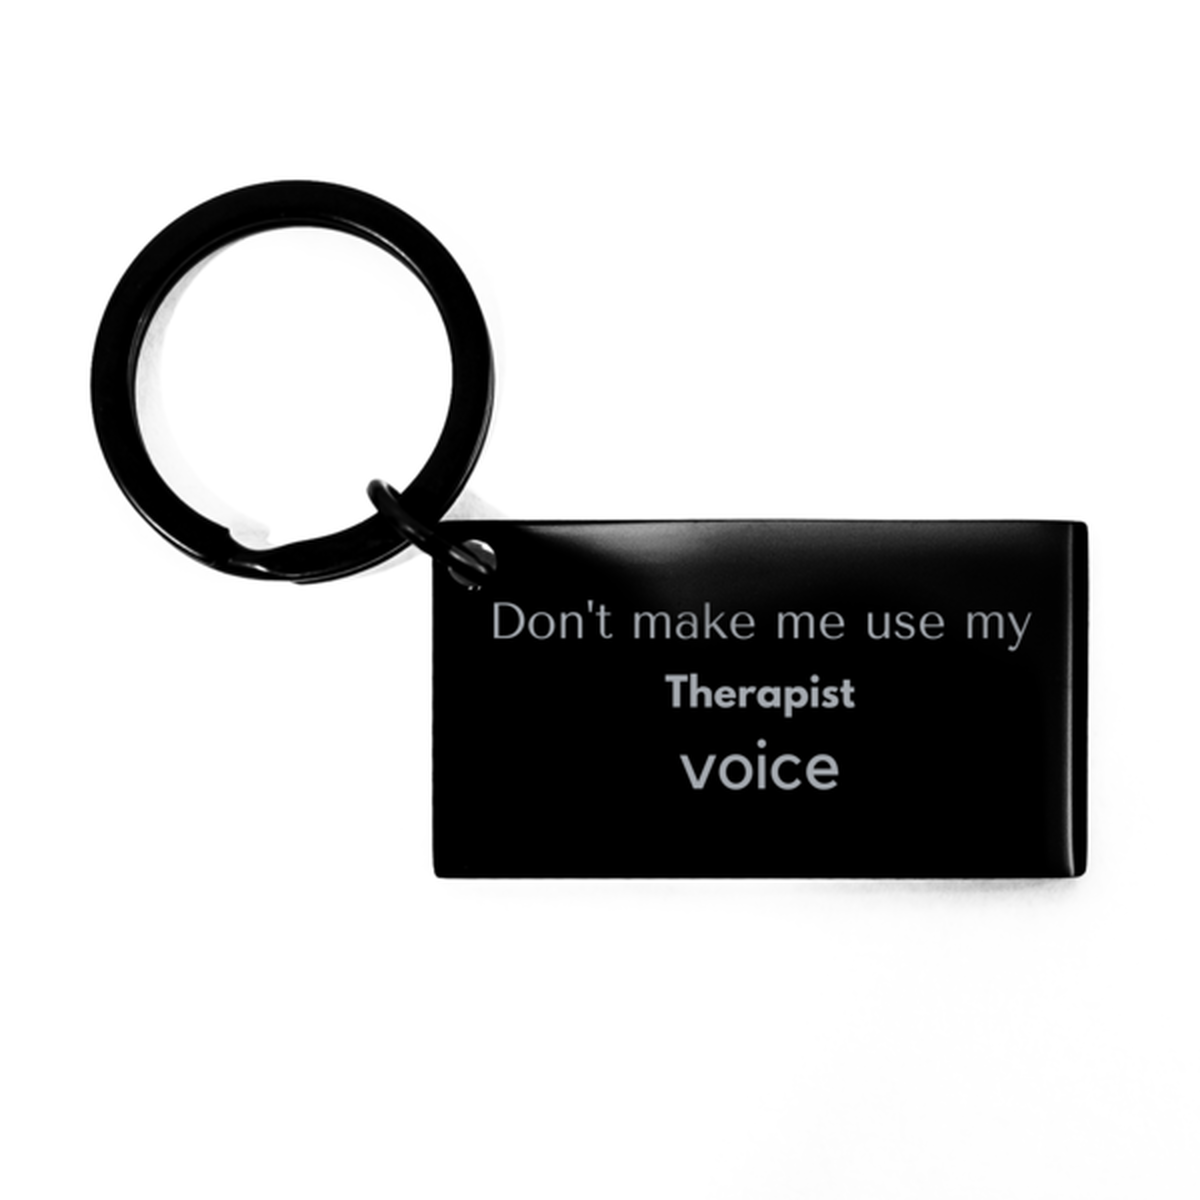 Don't make me use my Therapist voice, Sarcasm Therapist Gifts, Christmas Therapist Keychain Birthday Unique Gifts For Therapist Coworkers, Men, Women, Colleague, Friends